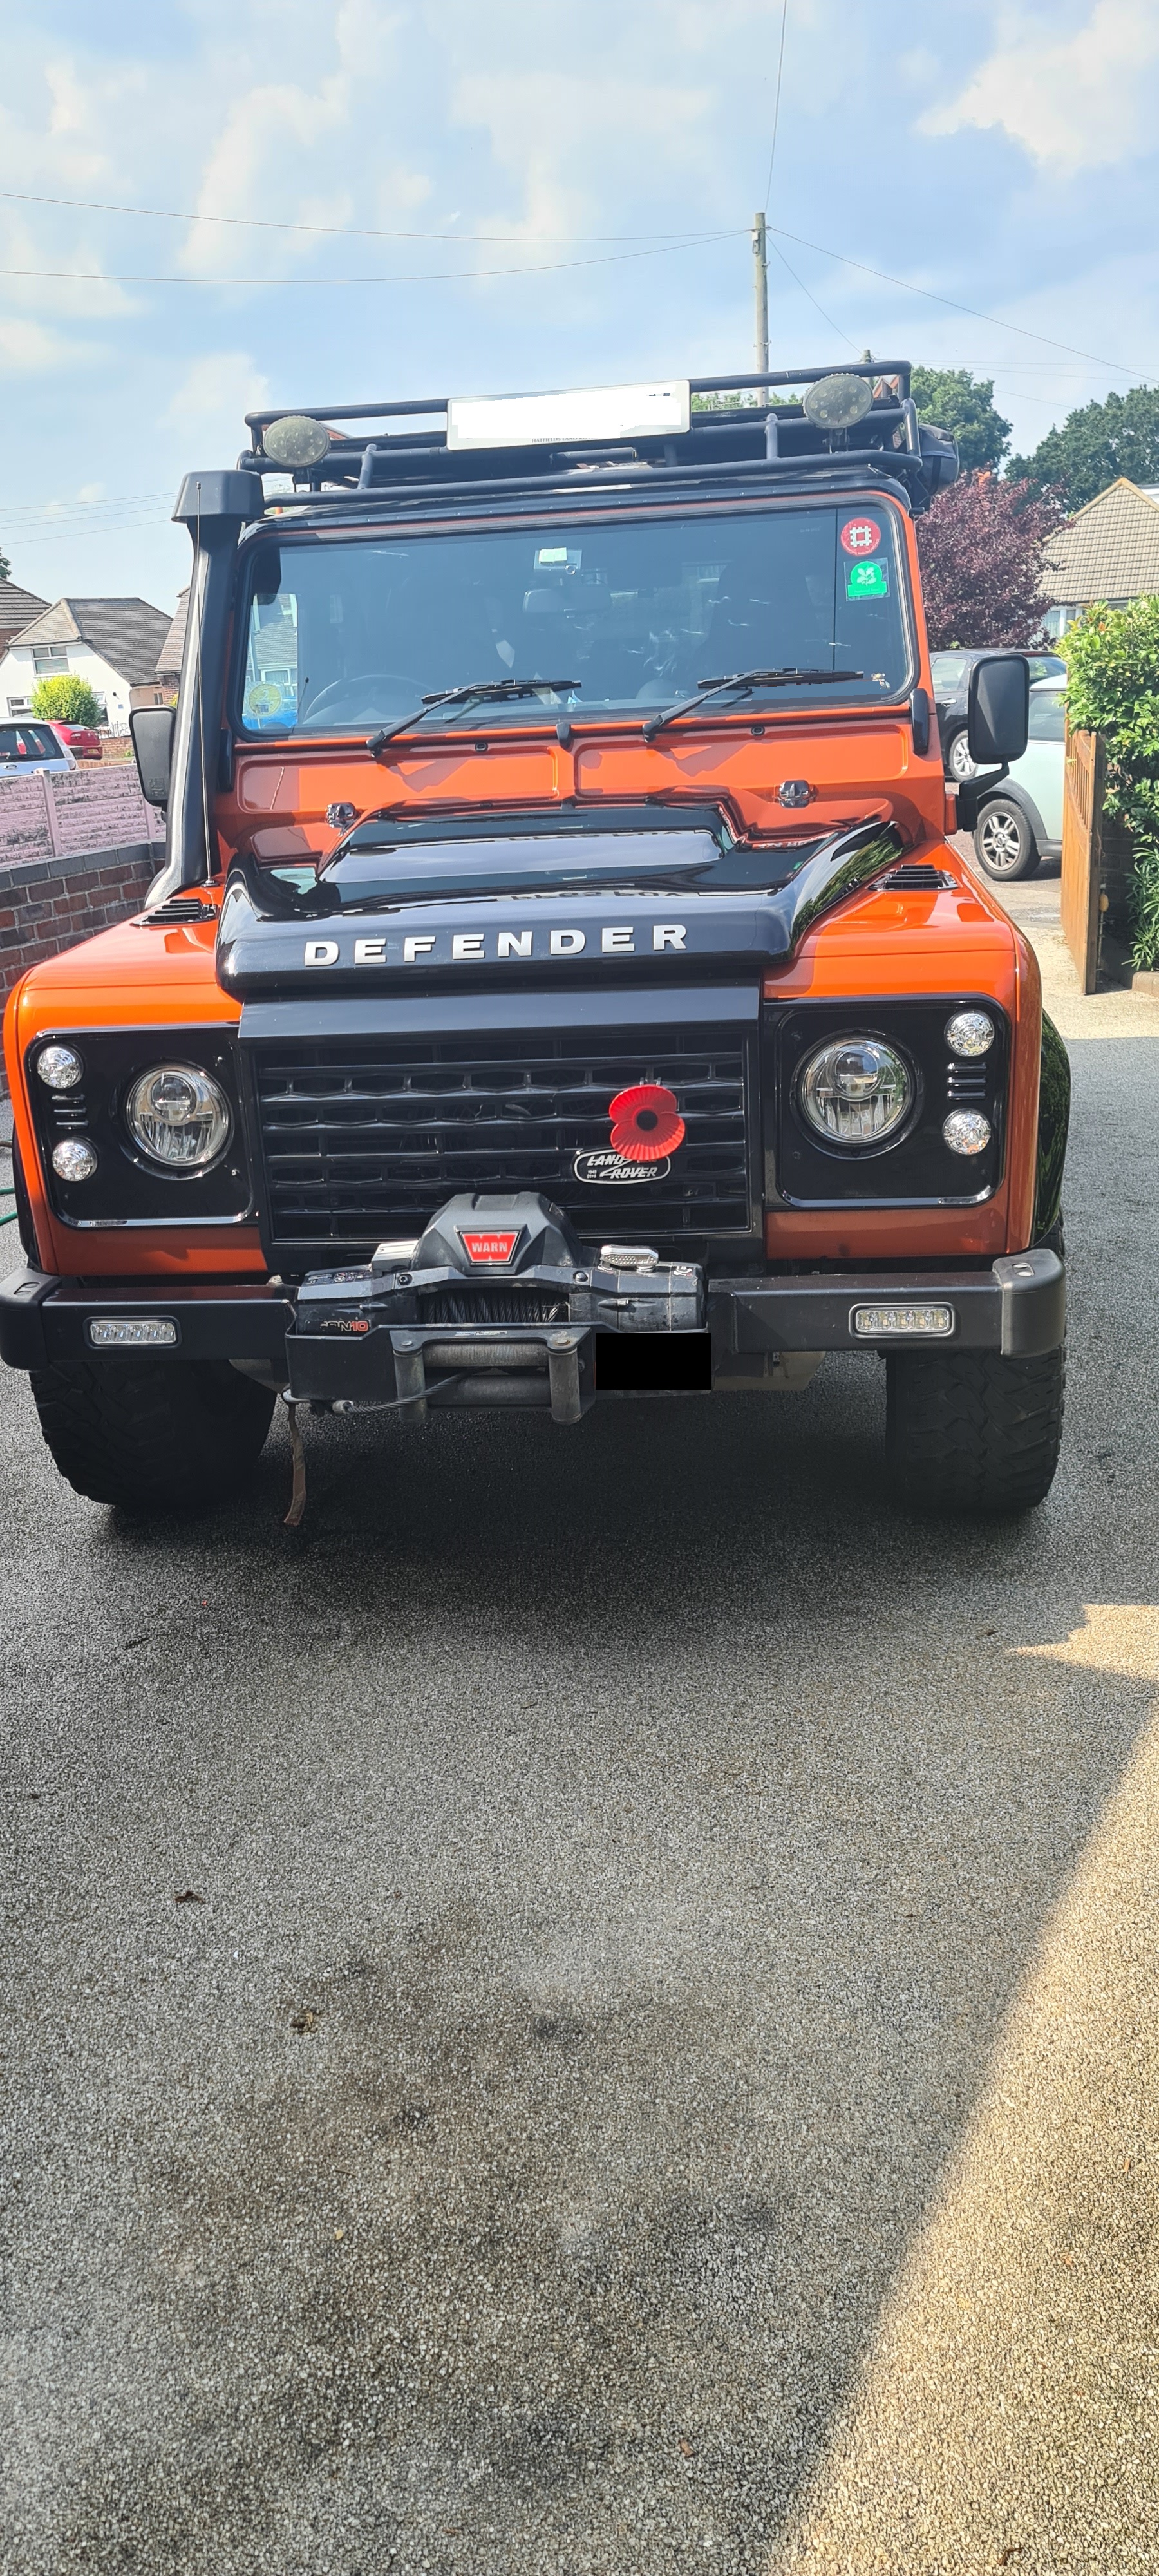 ICONIC RARE HERITAGE LANDROVER DEFENDER ADVENTURER DECEMBER 2015 ONE OF THE LAST MADE